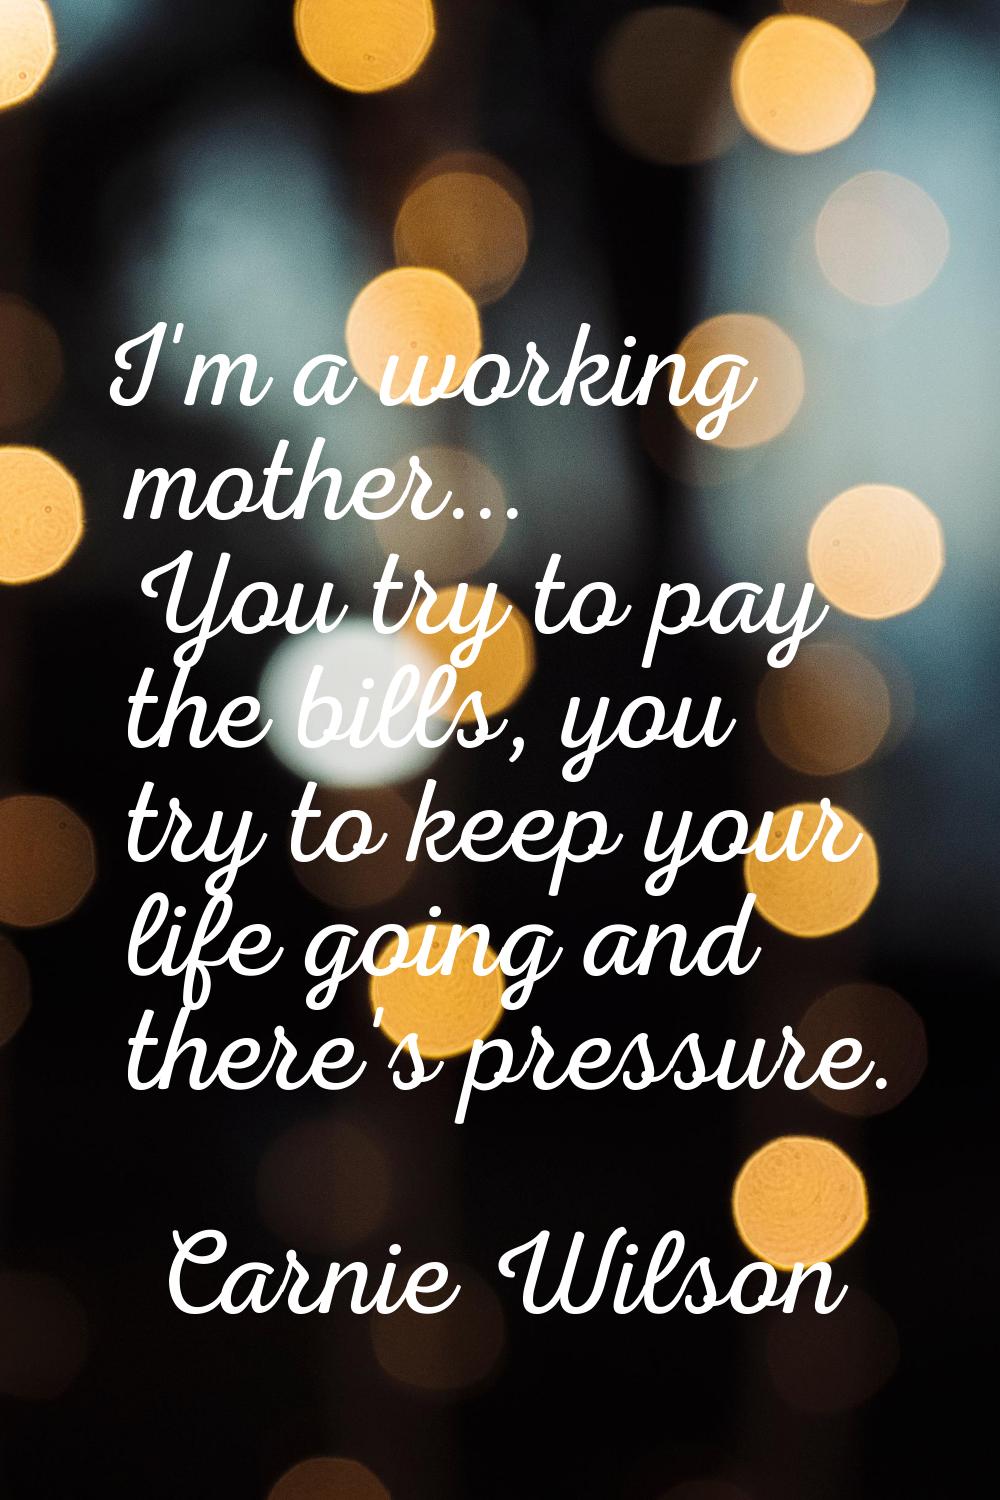 I'm a working mother... You try to pay the bills, you try to keep your life going and there's press